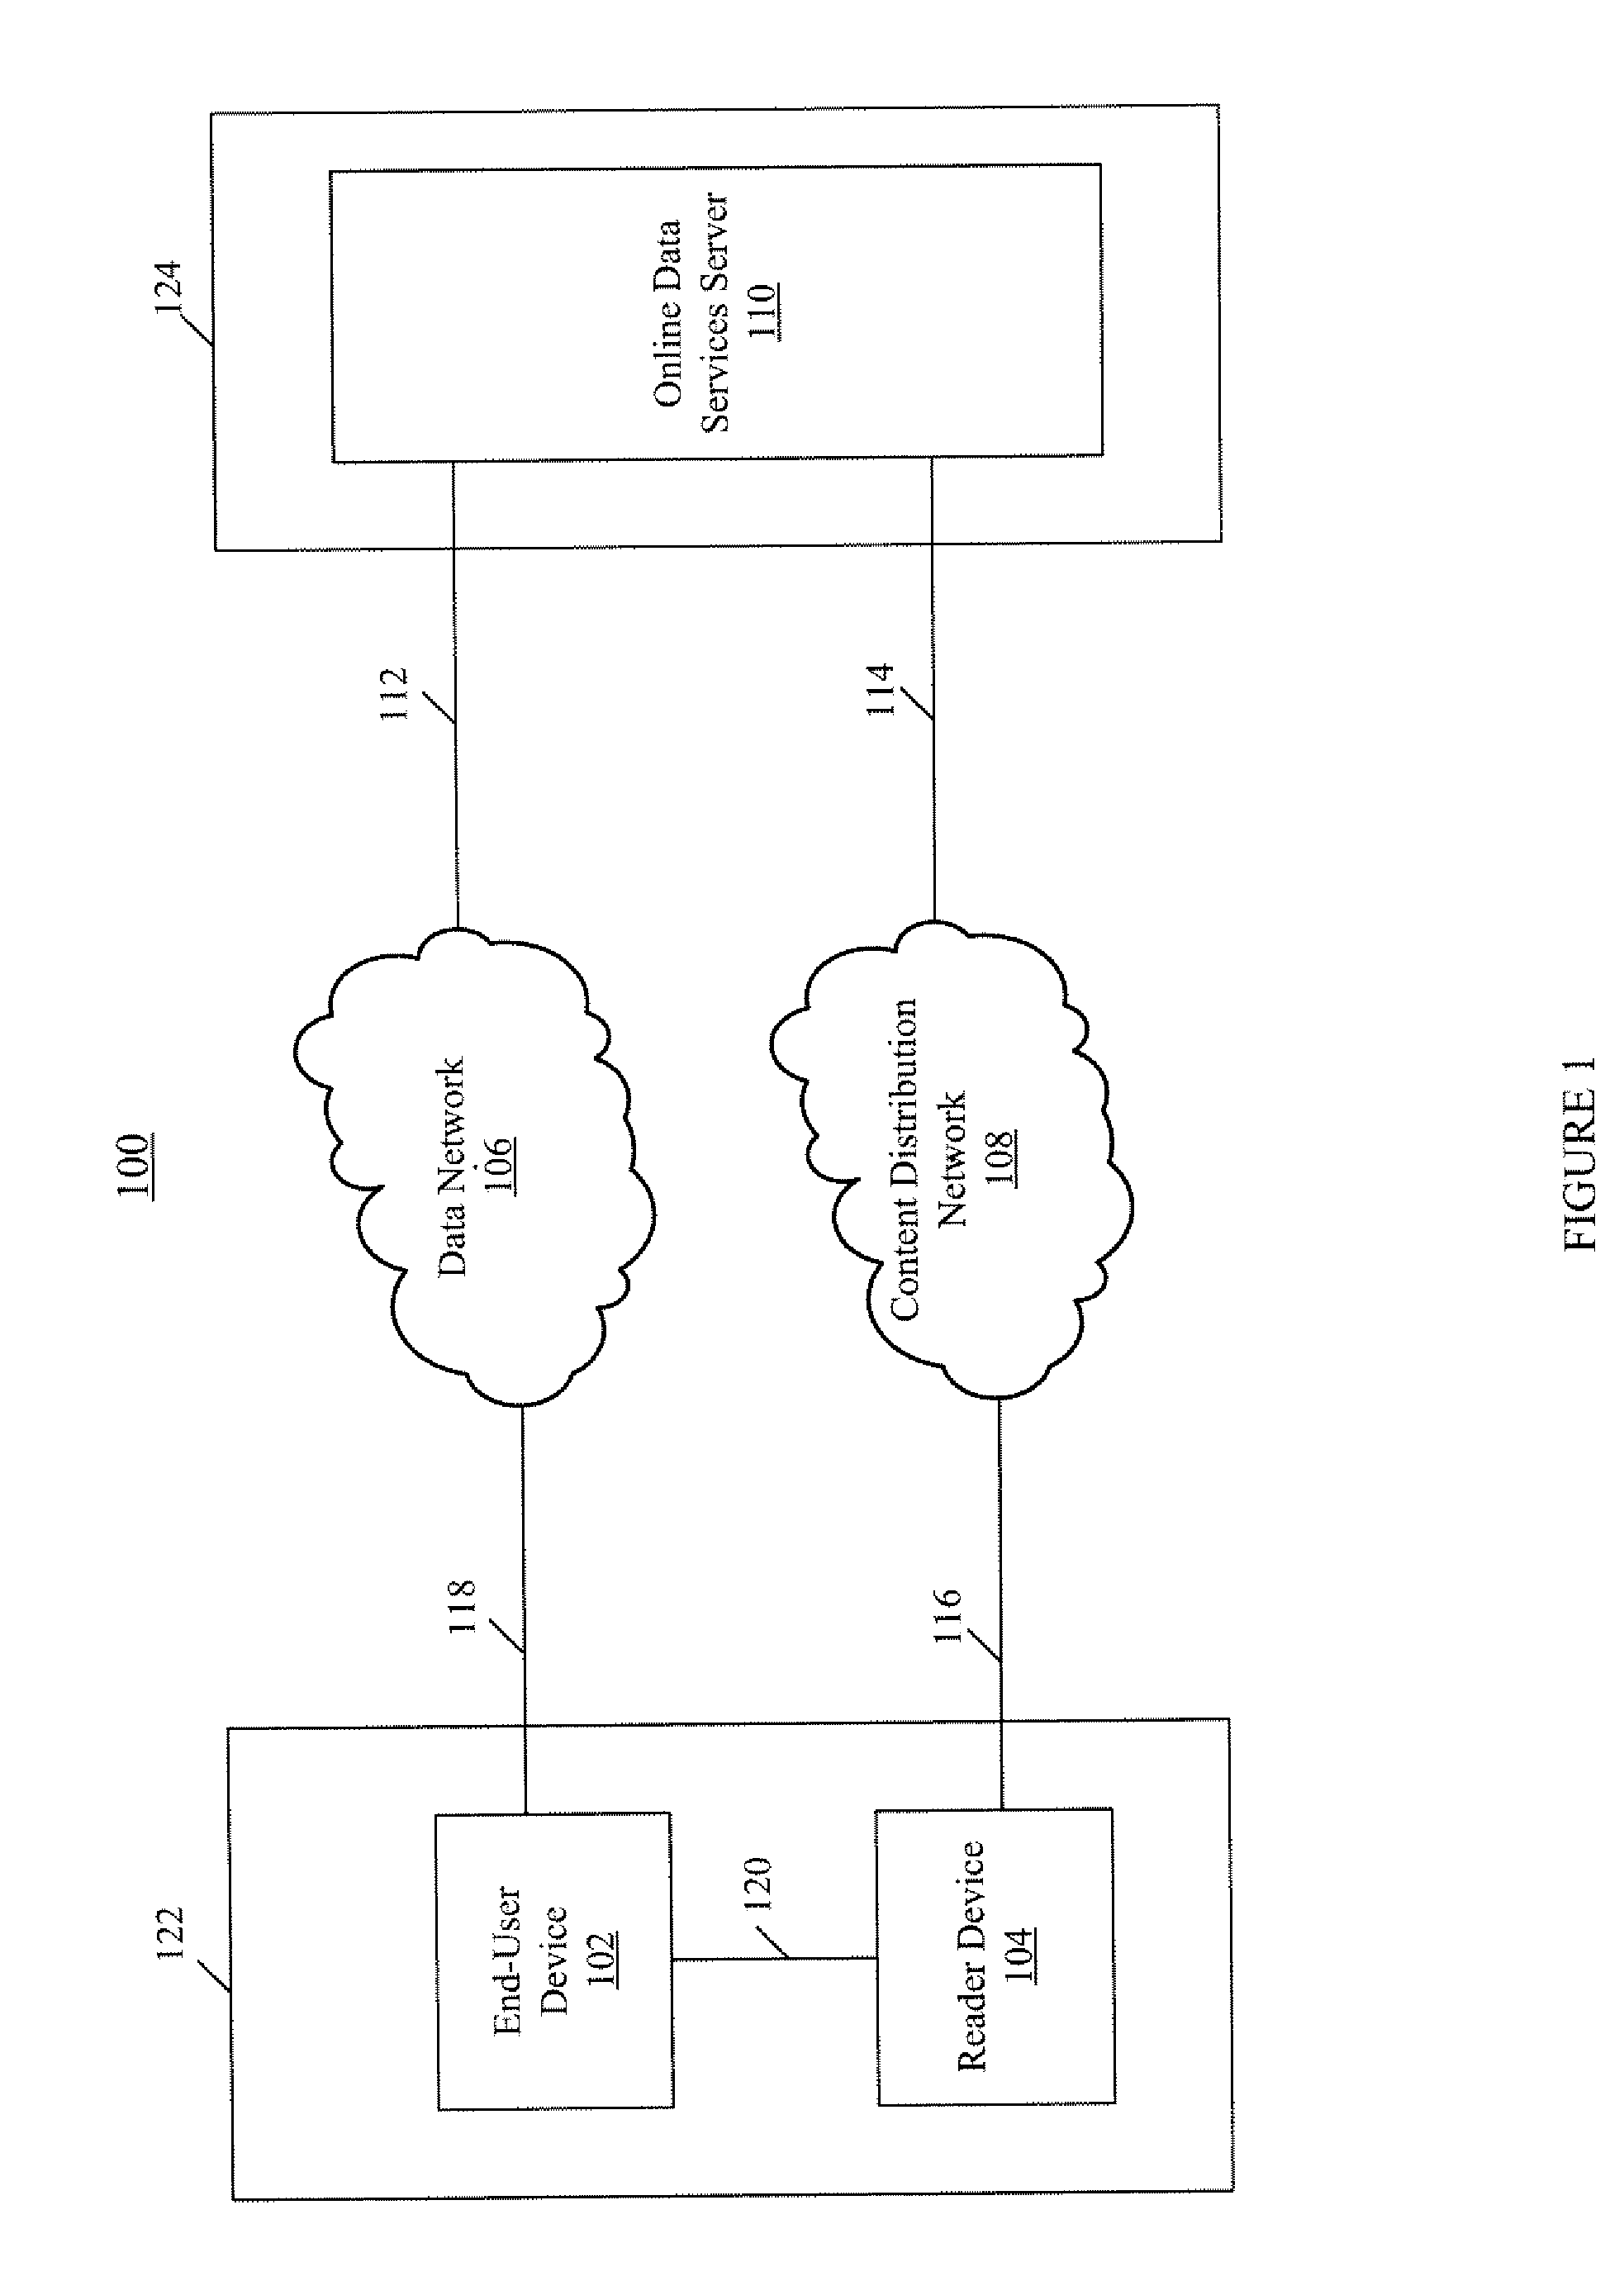 Methods, apparatus, and systems for providing local and online data services